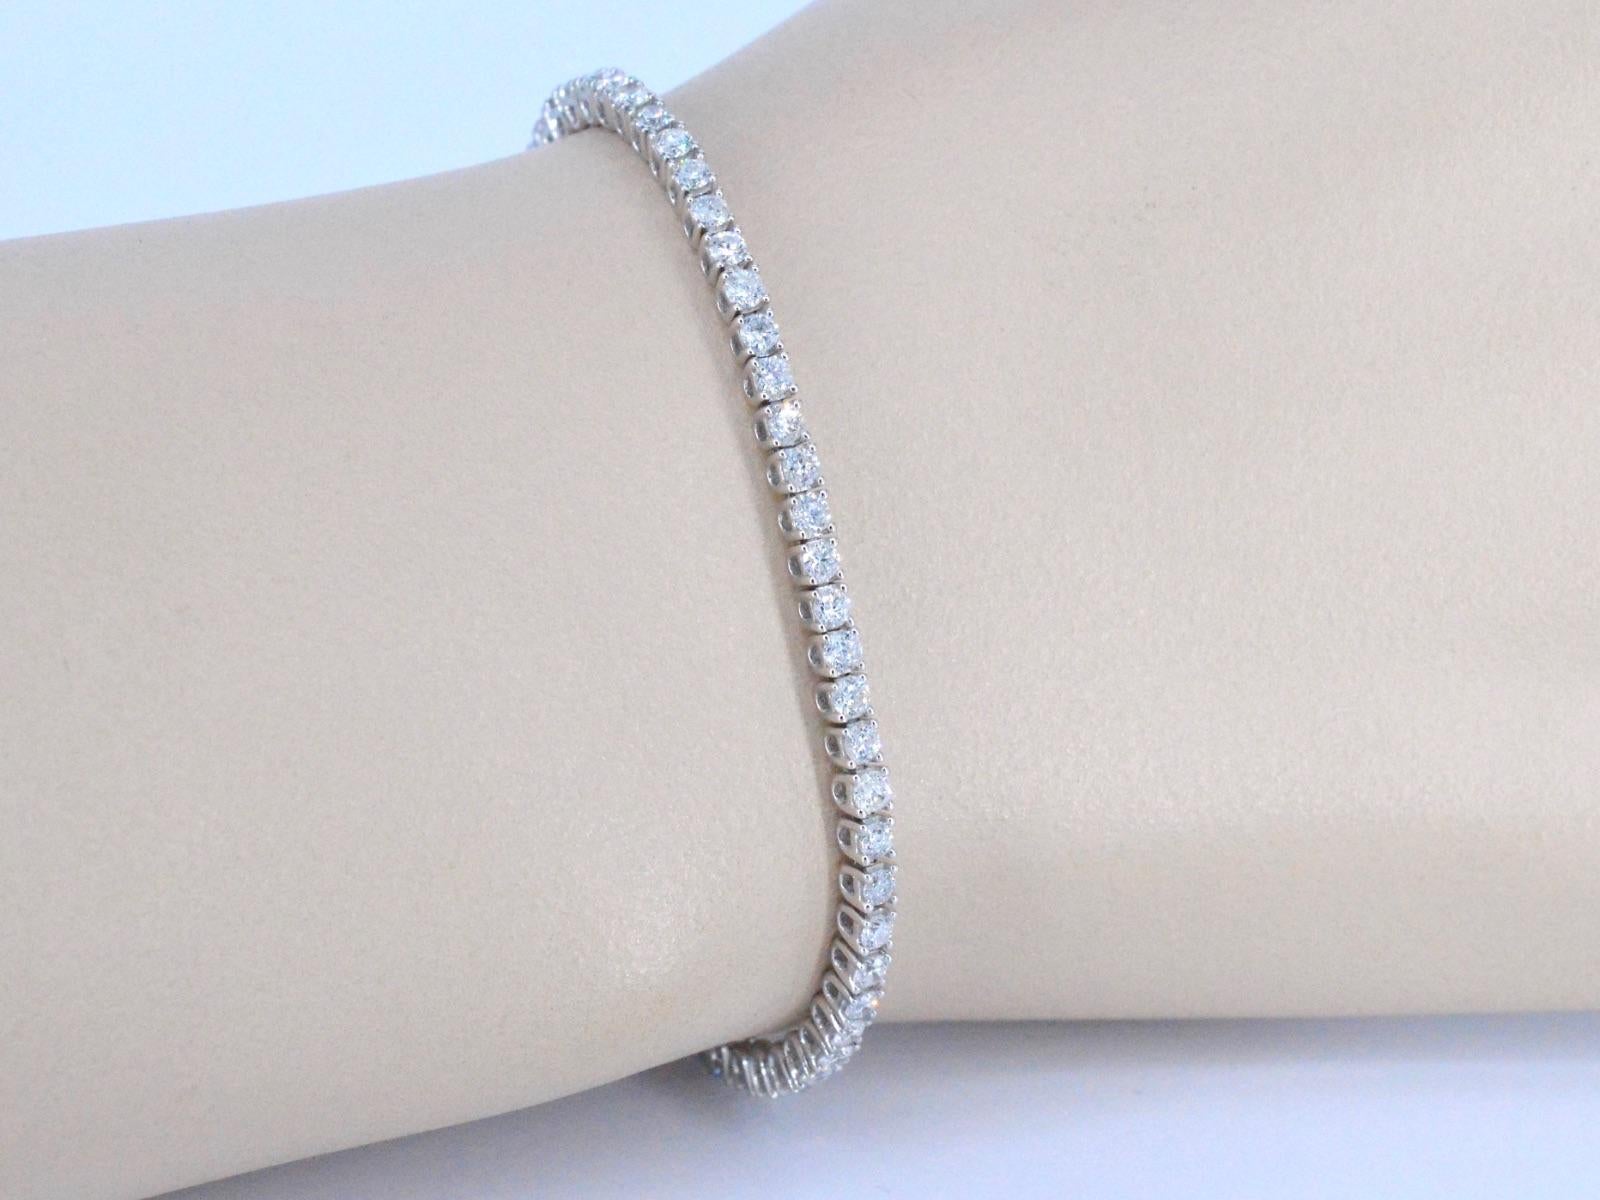 Introducing our exquisite white gold tennis bracelet with diamonds. This stunning piece features 3.50 carats of brilliant cut diamonds, with a beautiful F-G colour and SI-P clarity. The bracelet itself weighs in at 8.0 grams and measures 18cm in